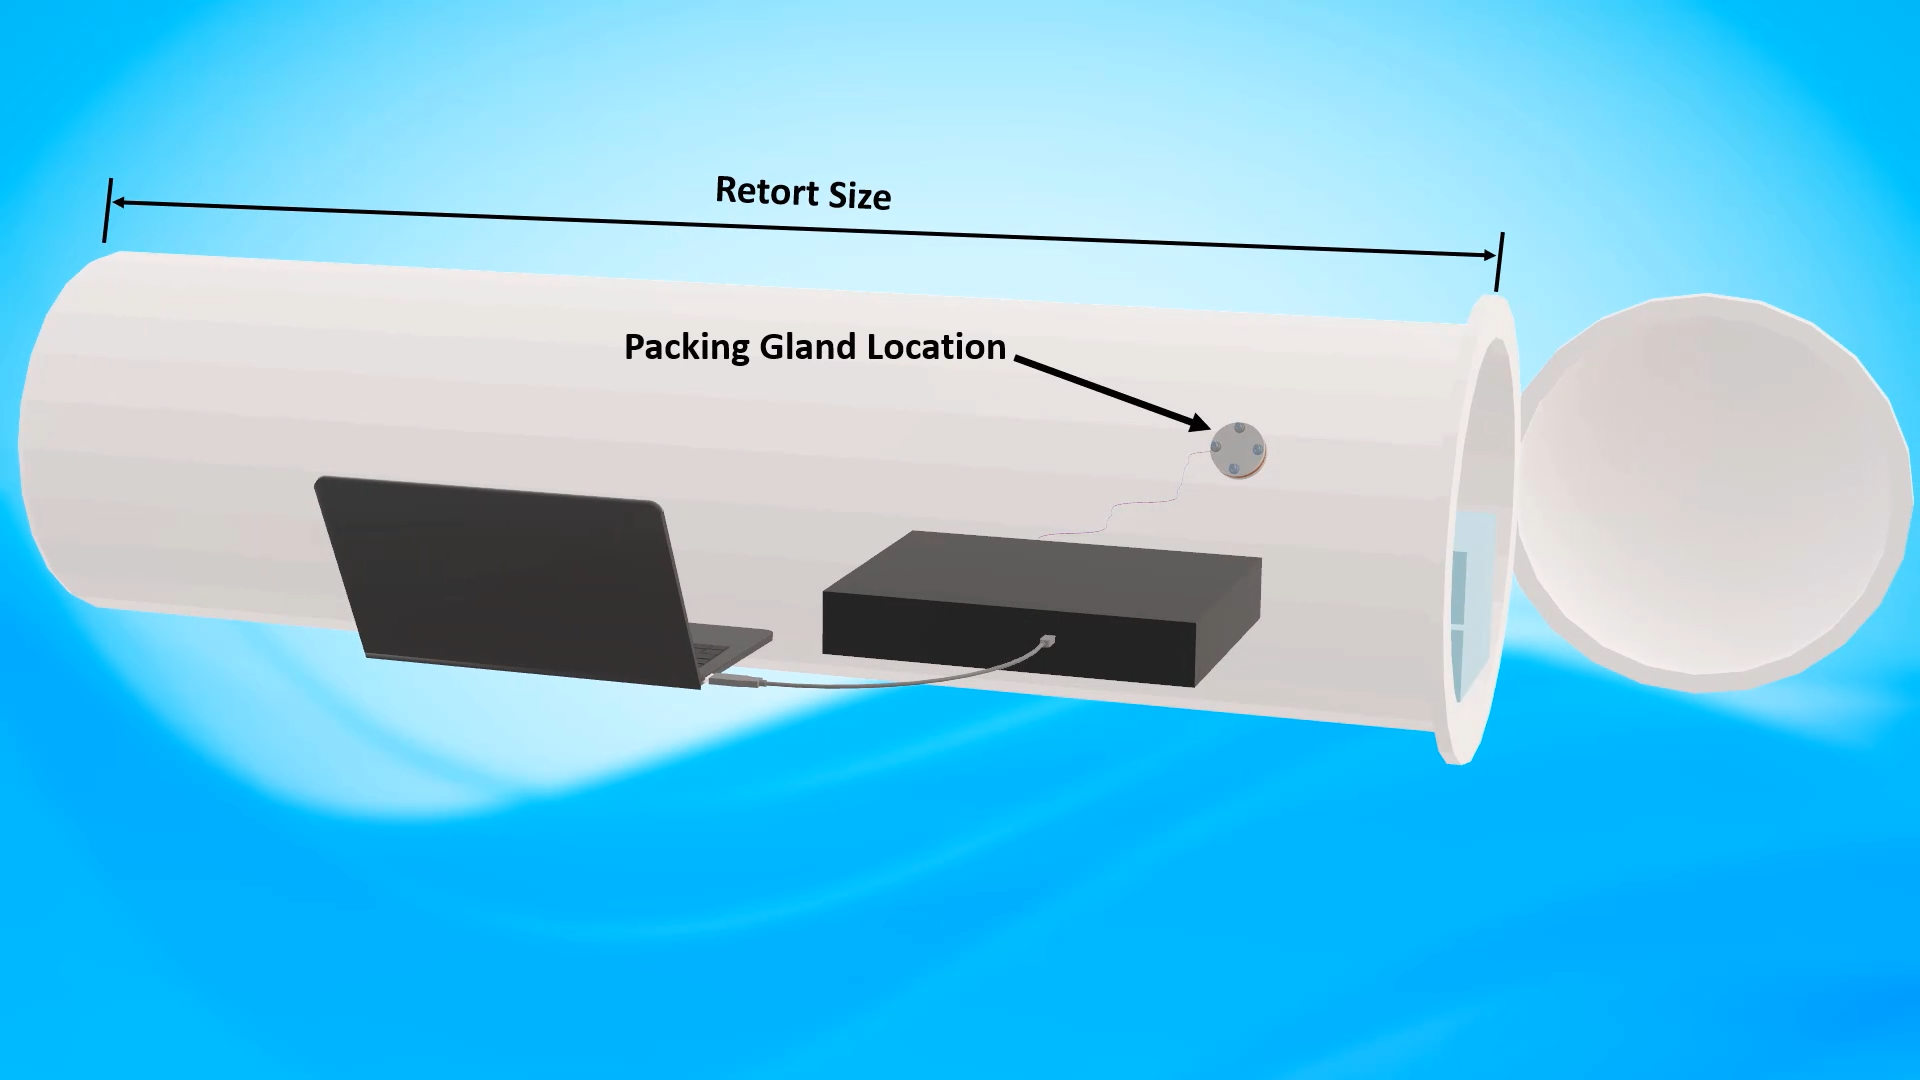 Retort size and packing gland location